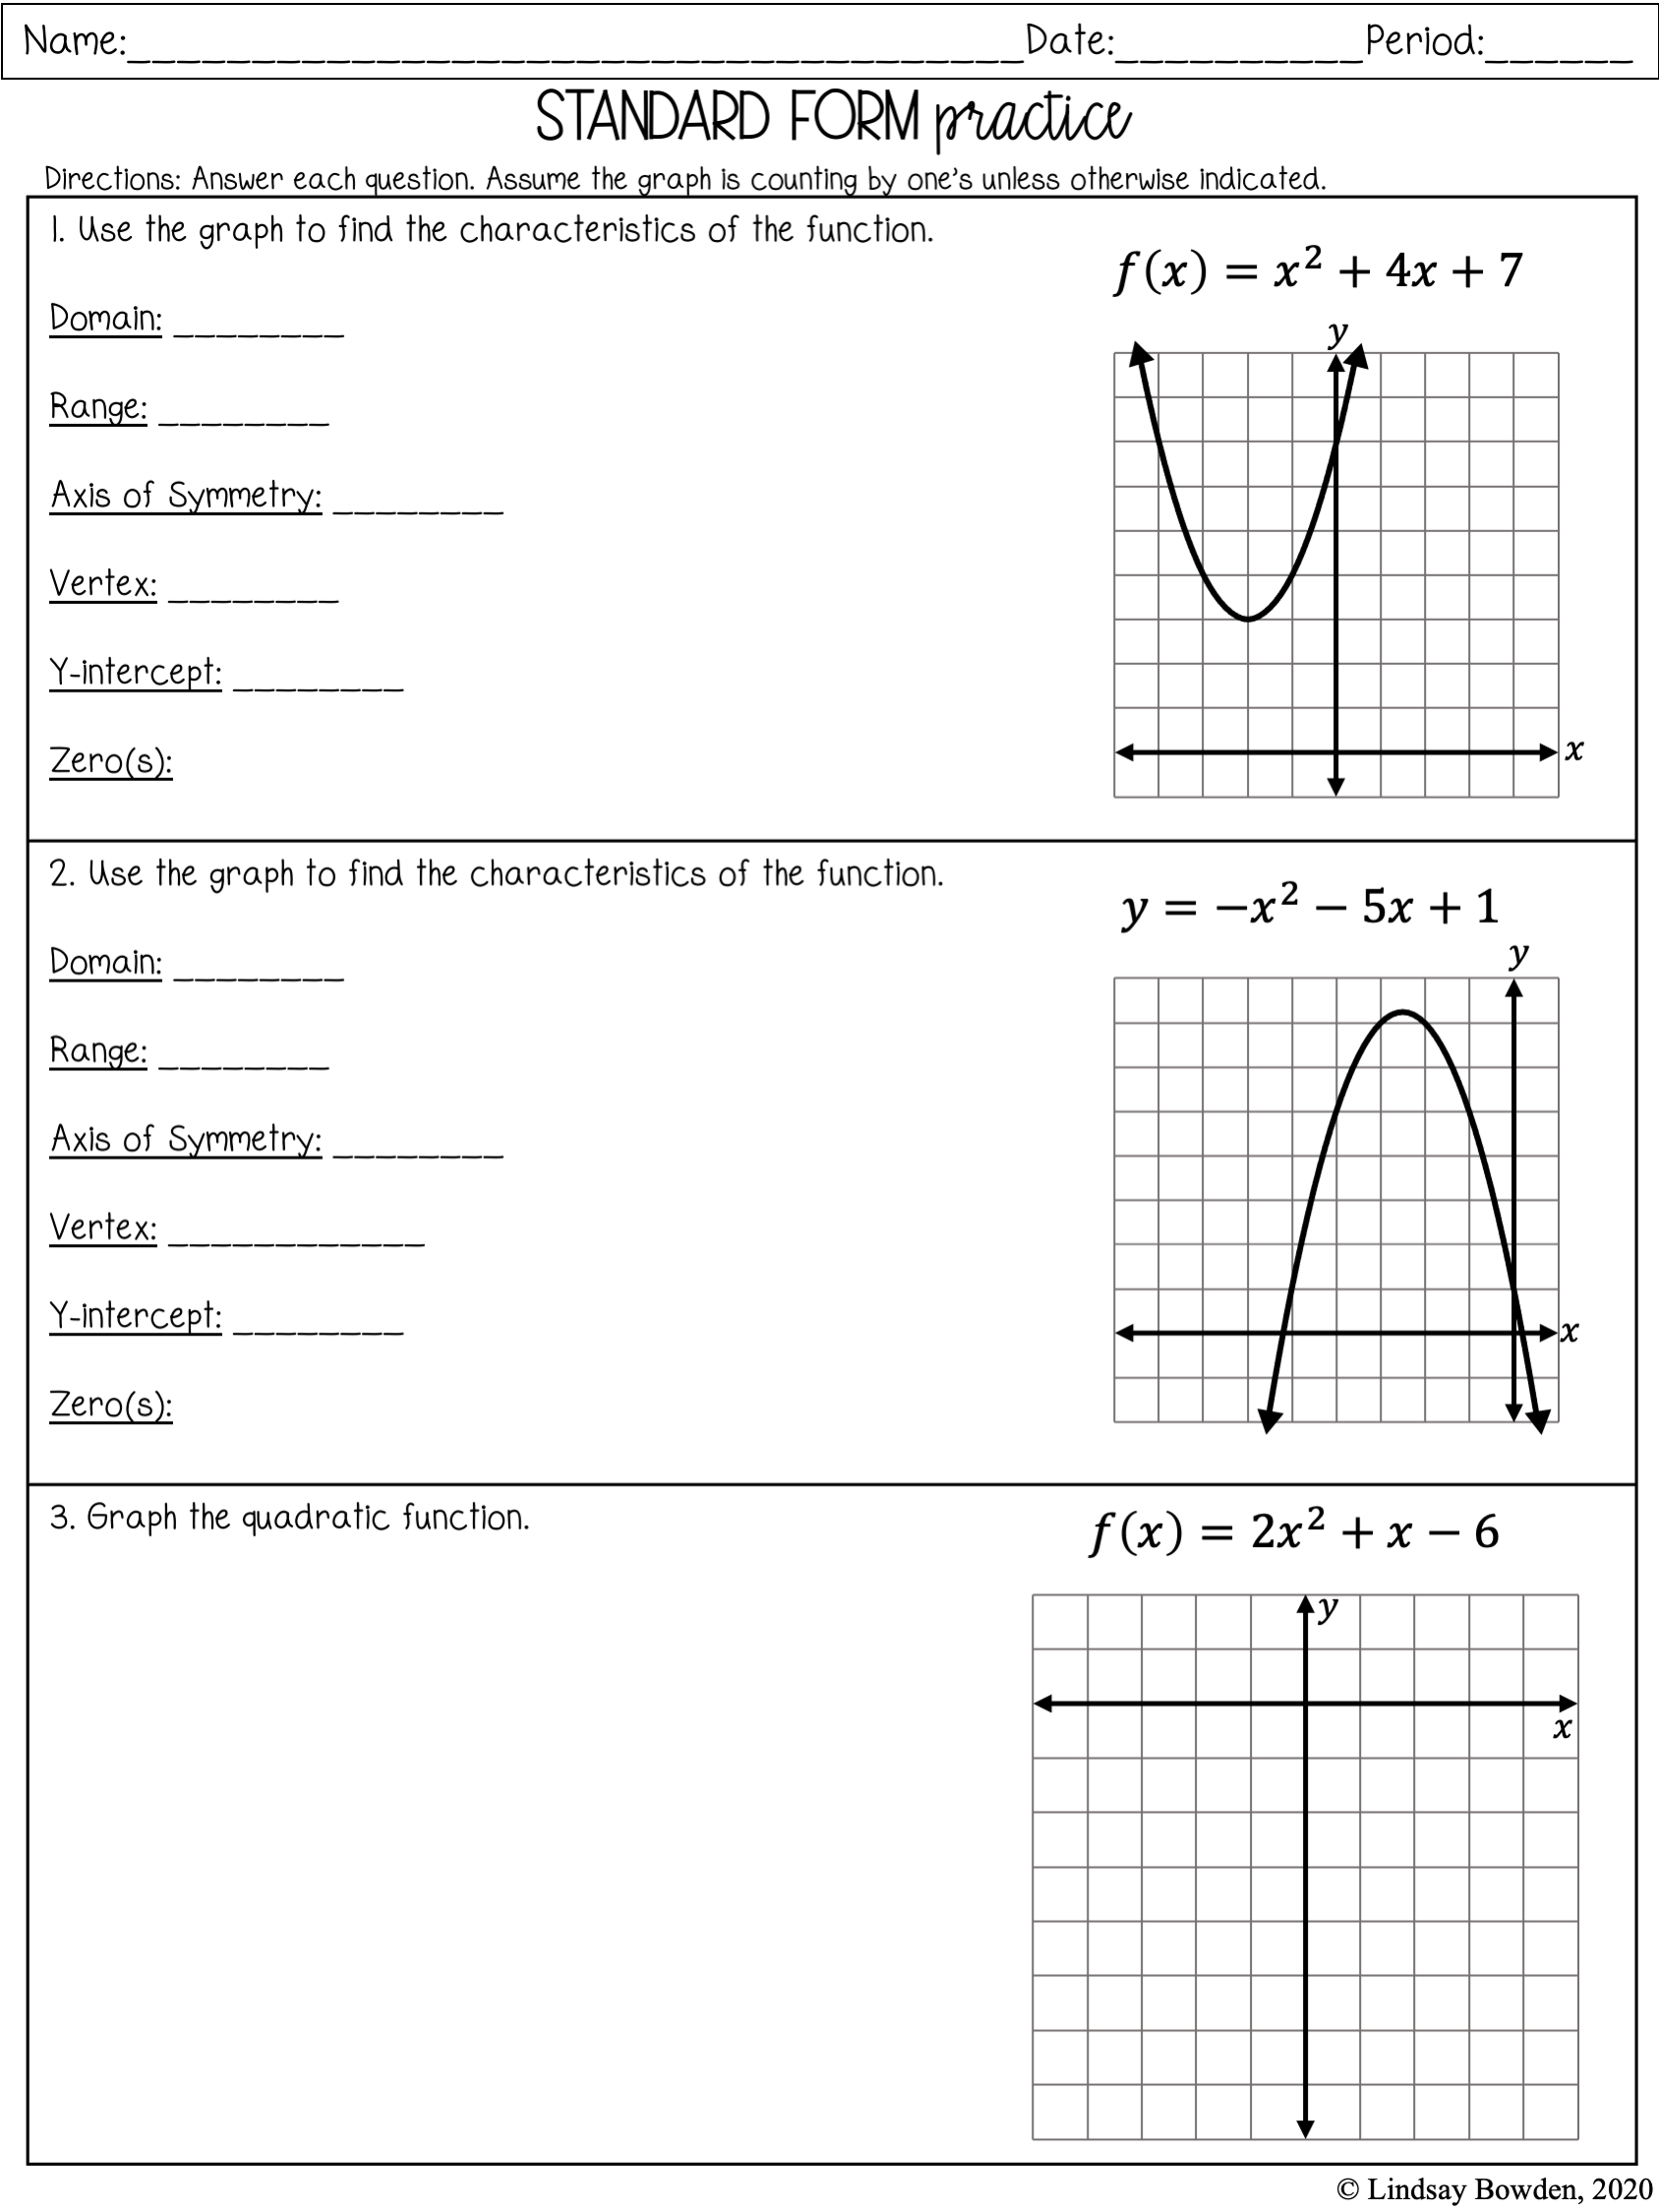 Graphing Quadratics Notes and Worksheets - Lindsay Bowden Within Characteristics Of Quadratic Functions Worksheet